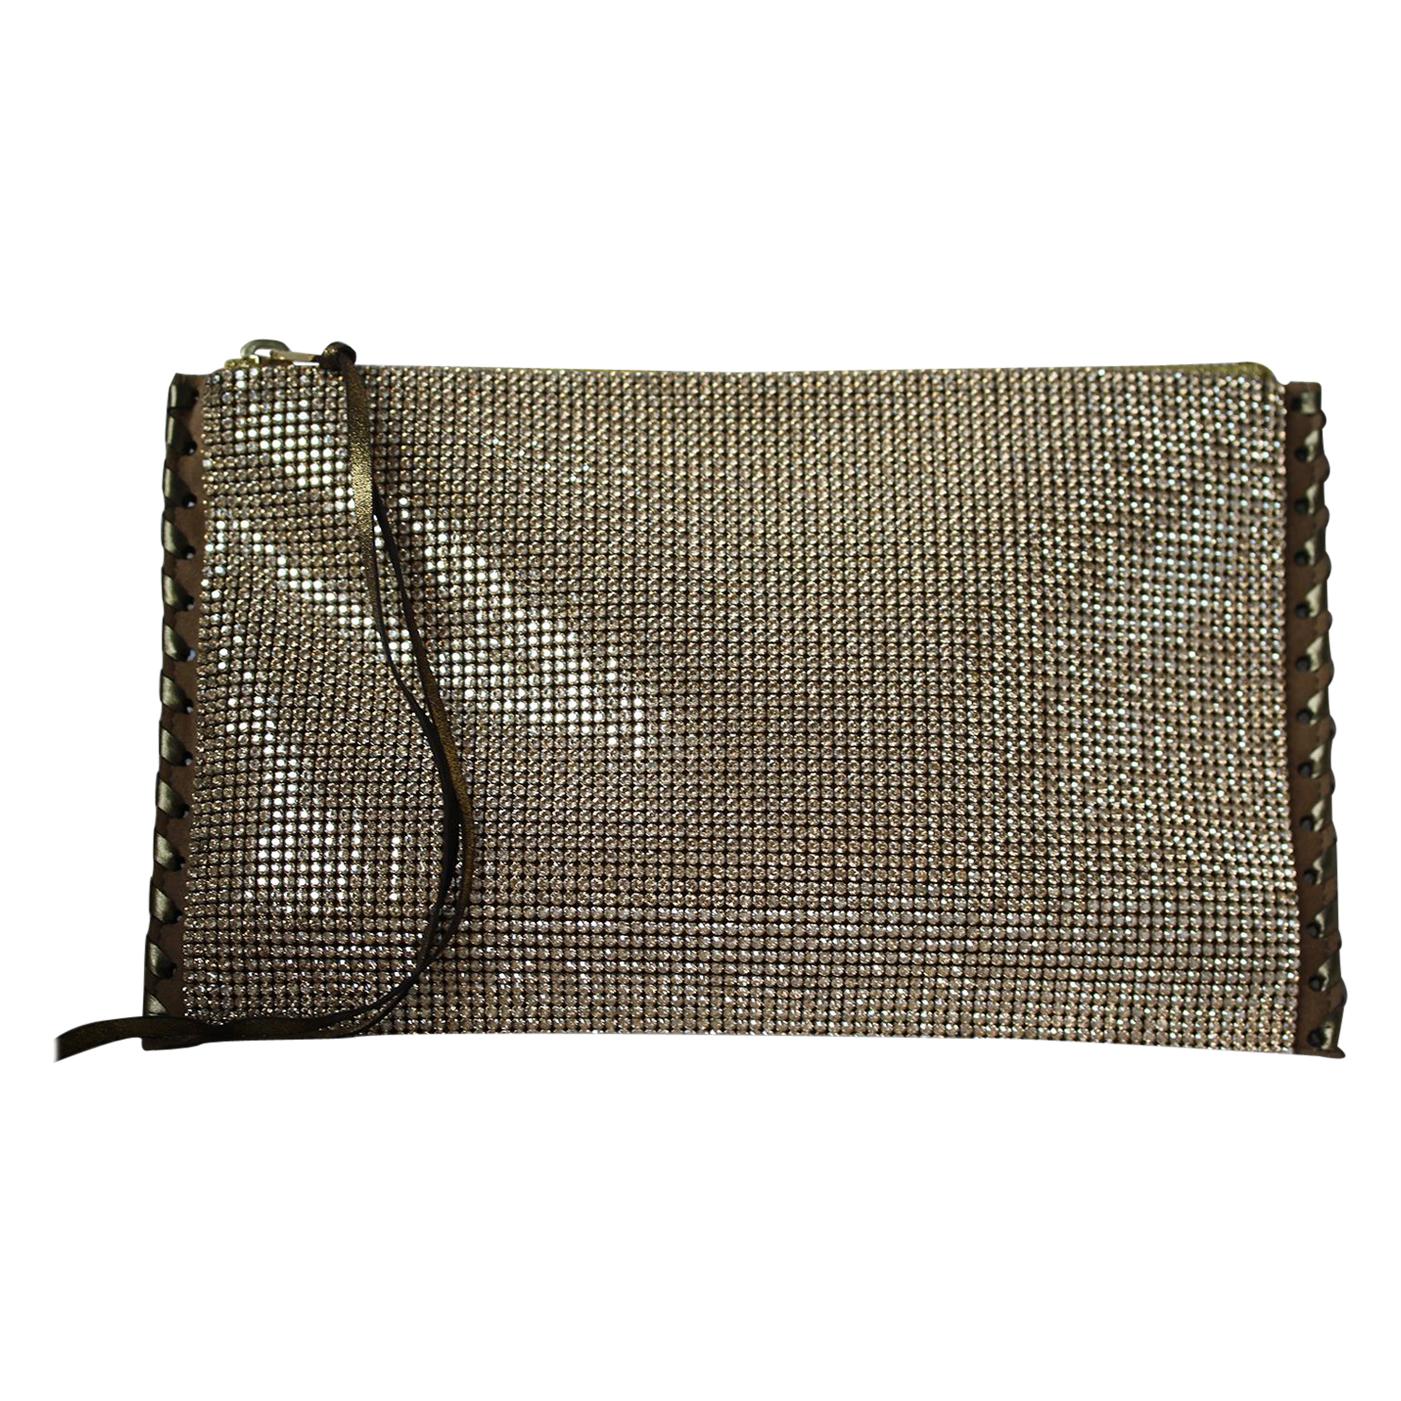 Balmain Gold Crystal Embellished Pouch Clutch